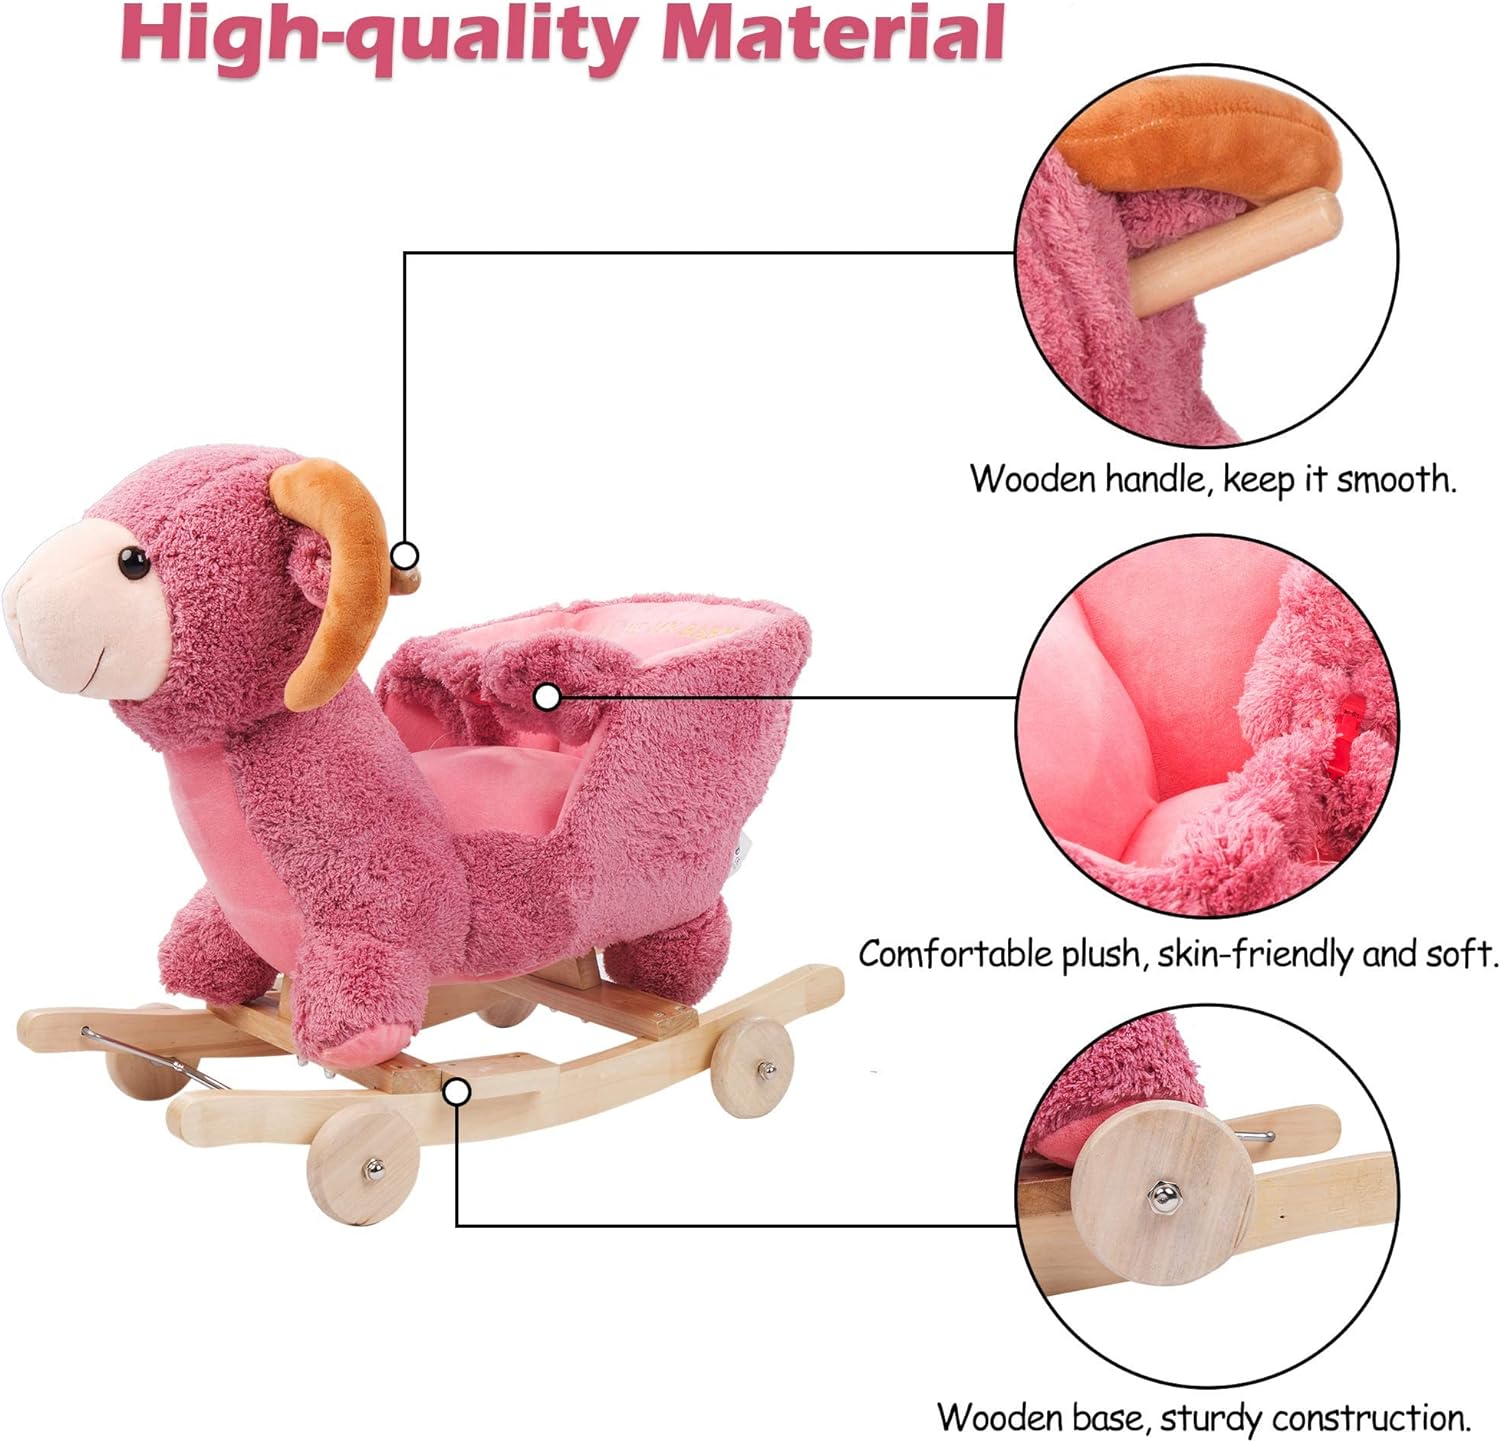 2-in-1 Ride-on Wooden Plush Rocking Horse Chair with Music for Baby Kids Toddlers, Pink Sheep